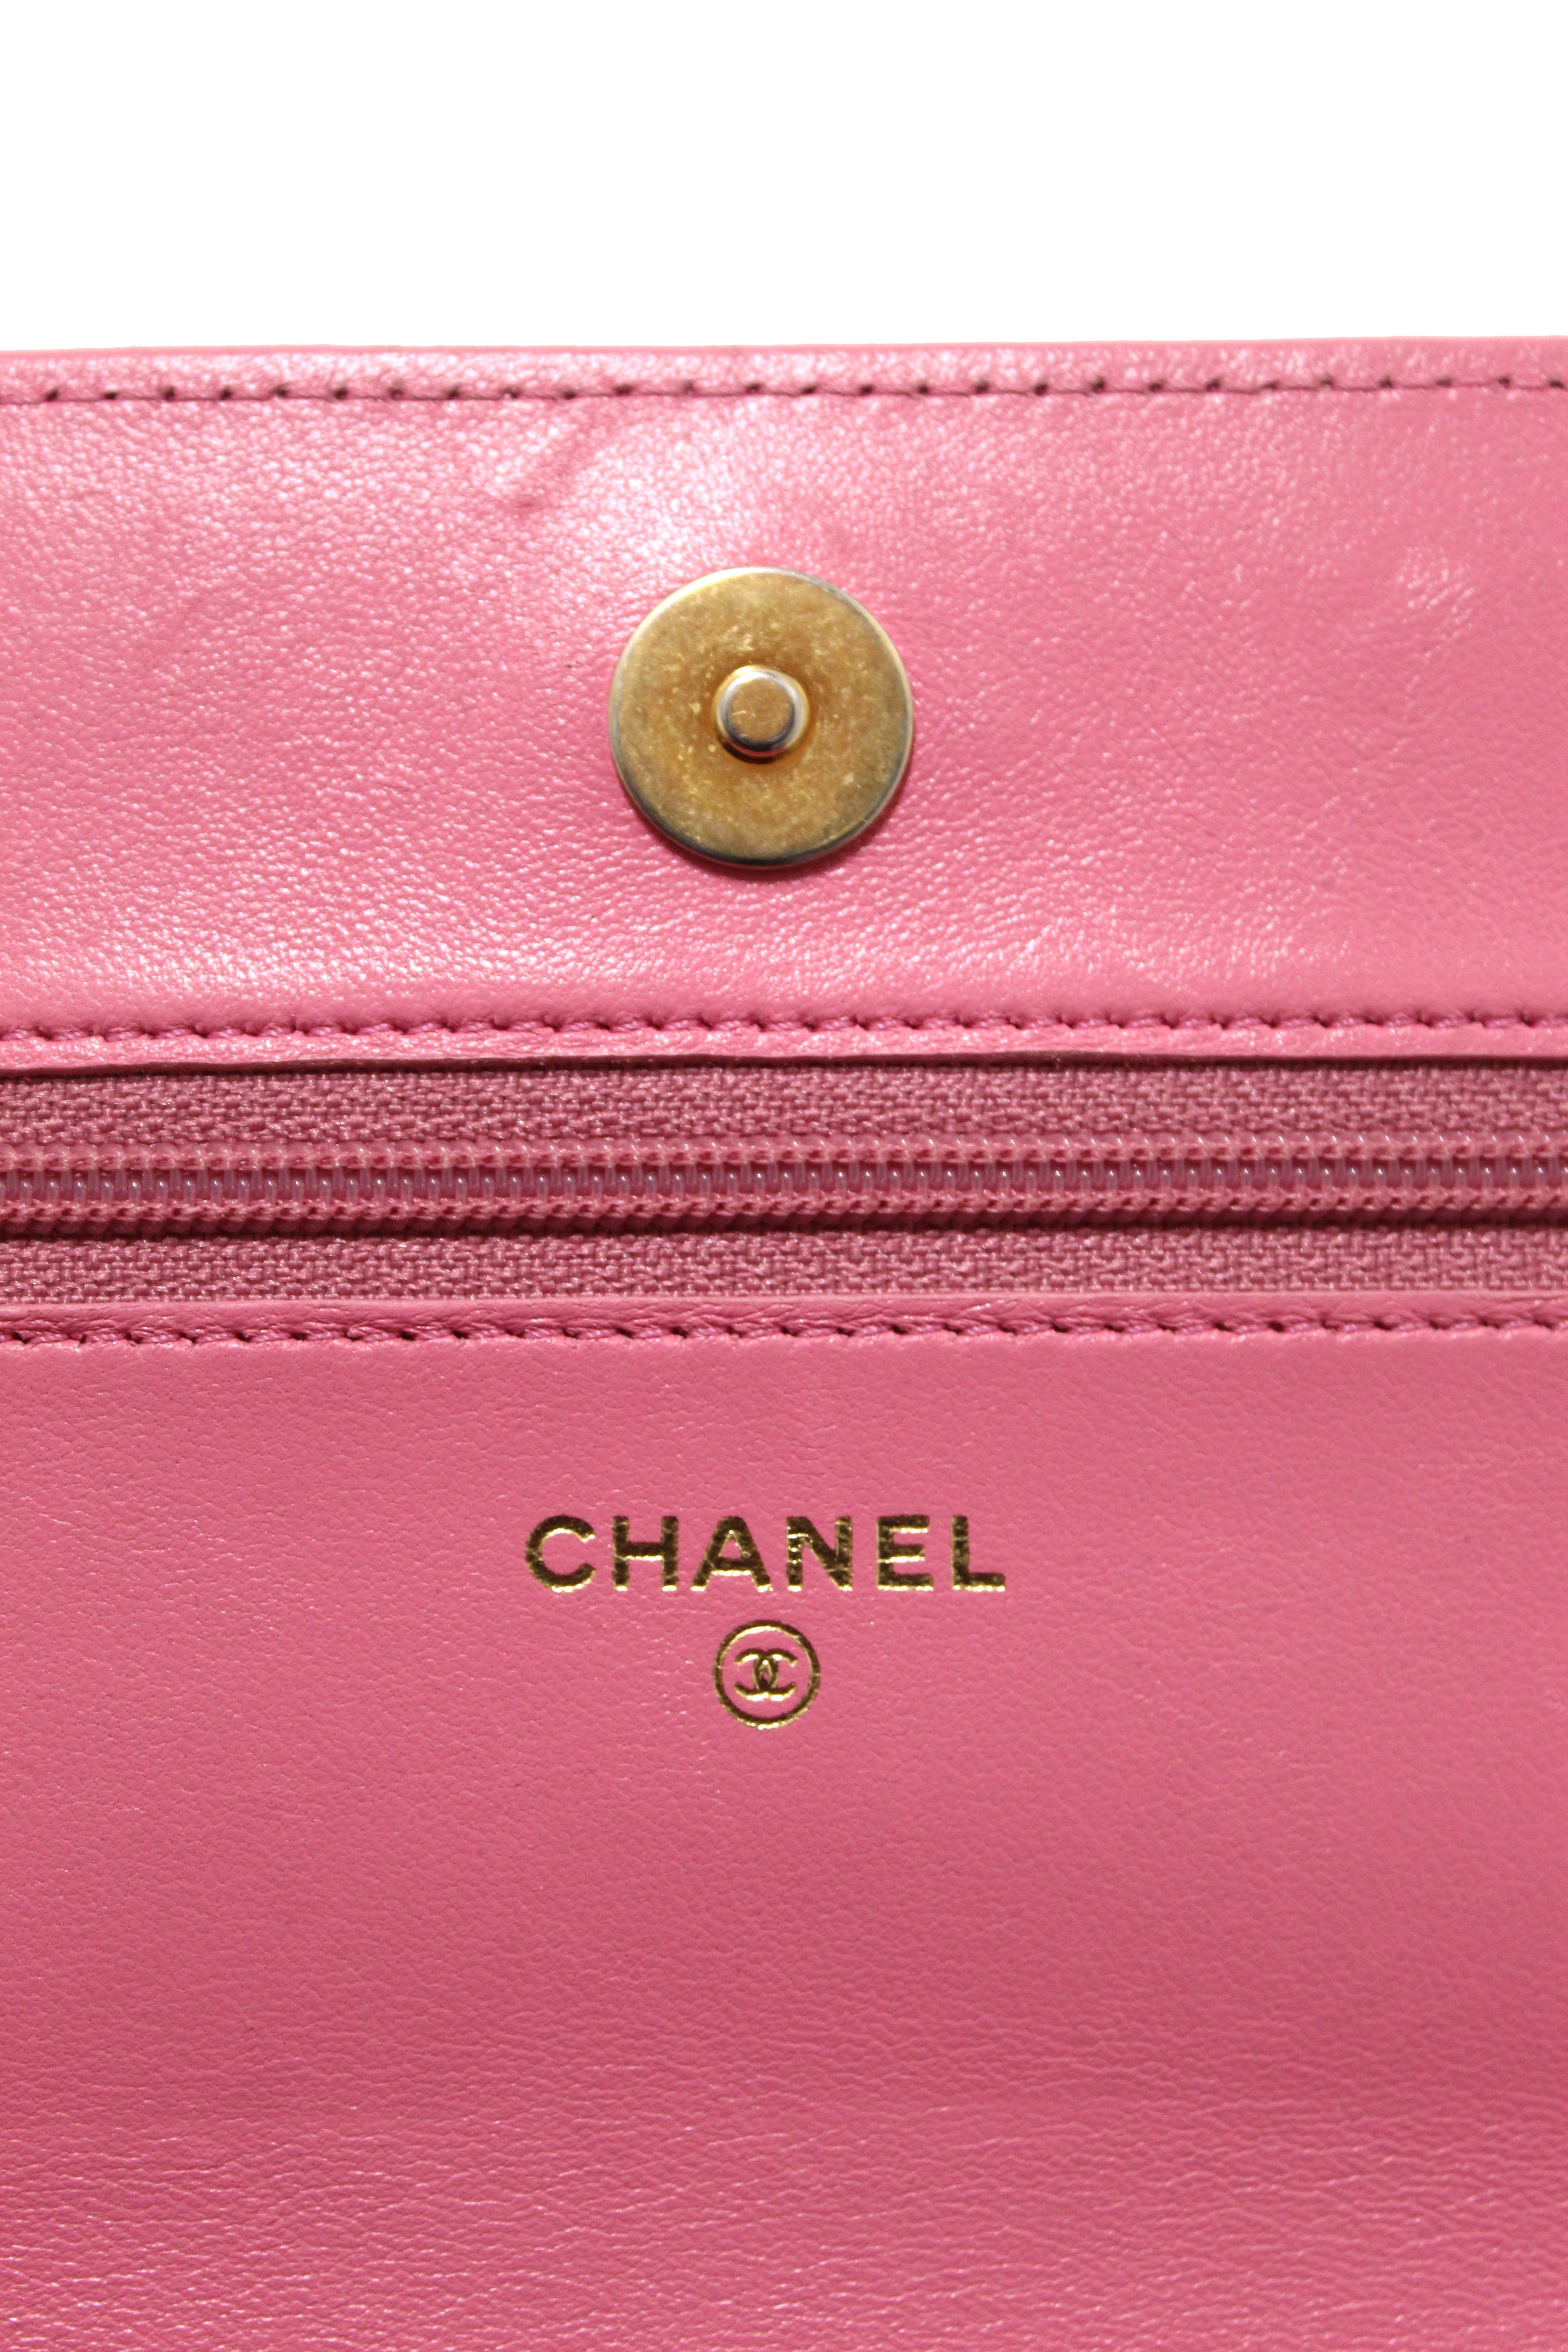 Authentic Chanel 19 Wallet On Chain WOC Pink Lambskin Leather